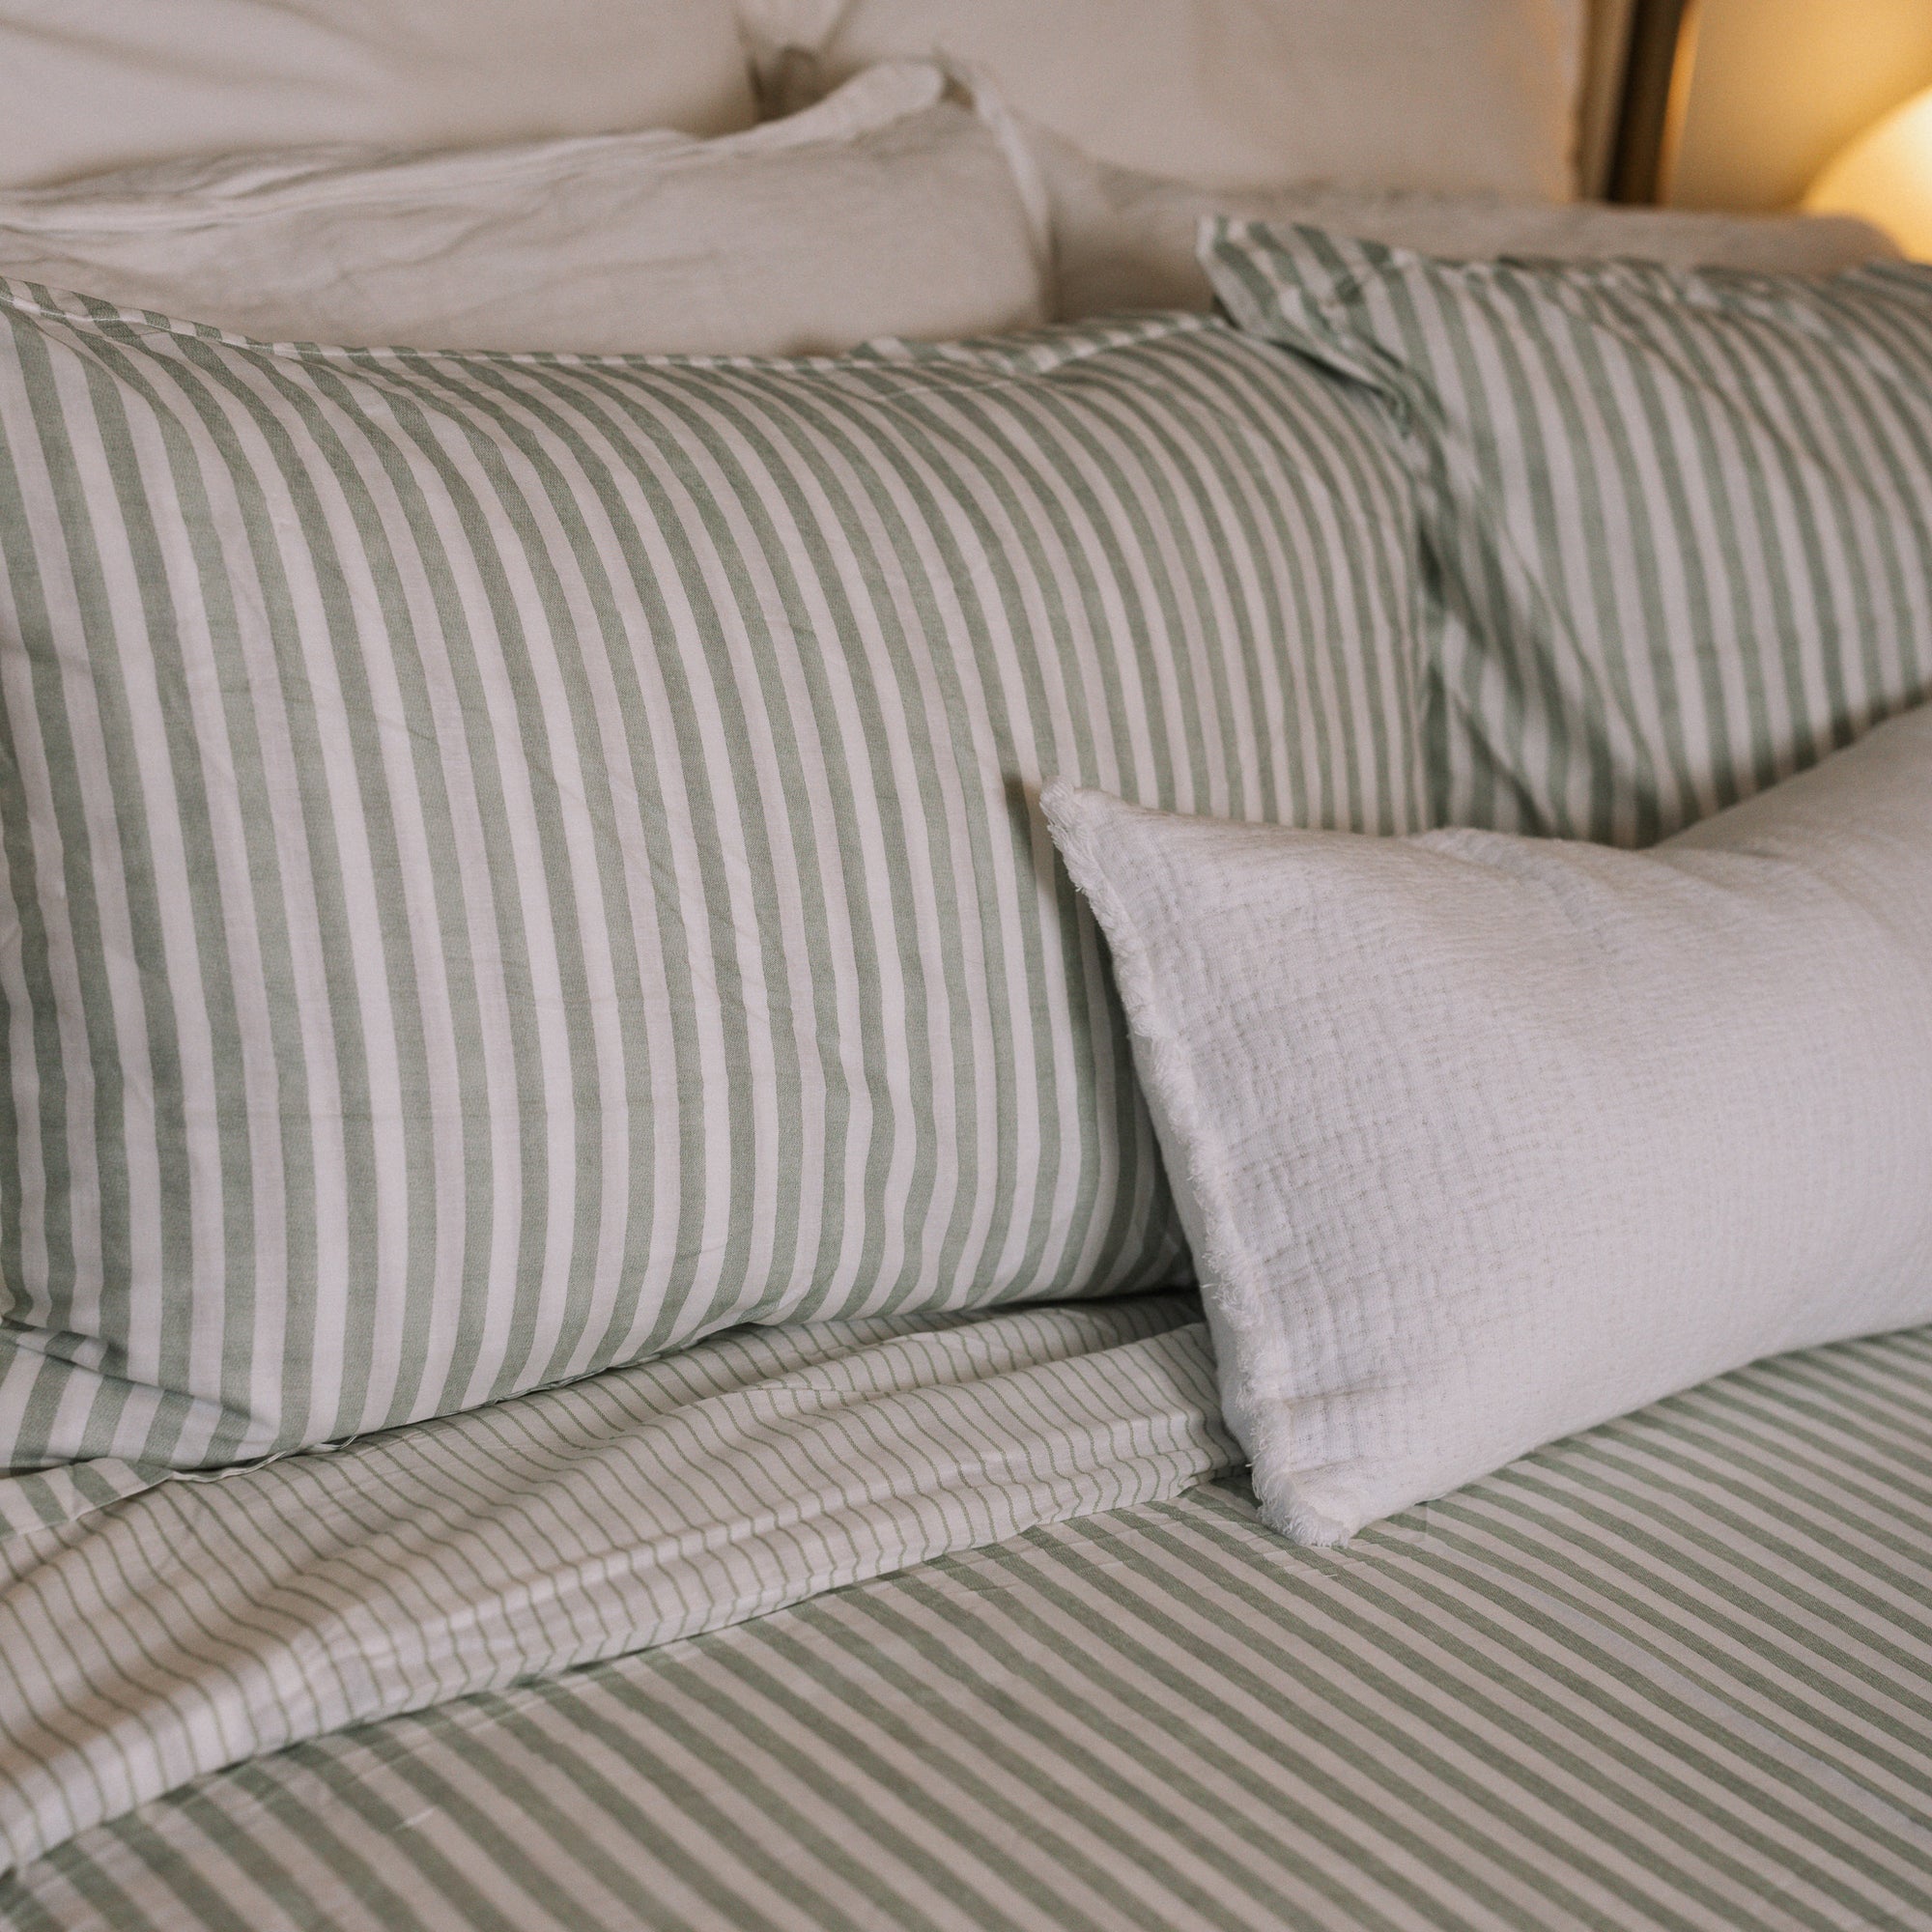 Green striped Bedding with white throw cushion.